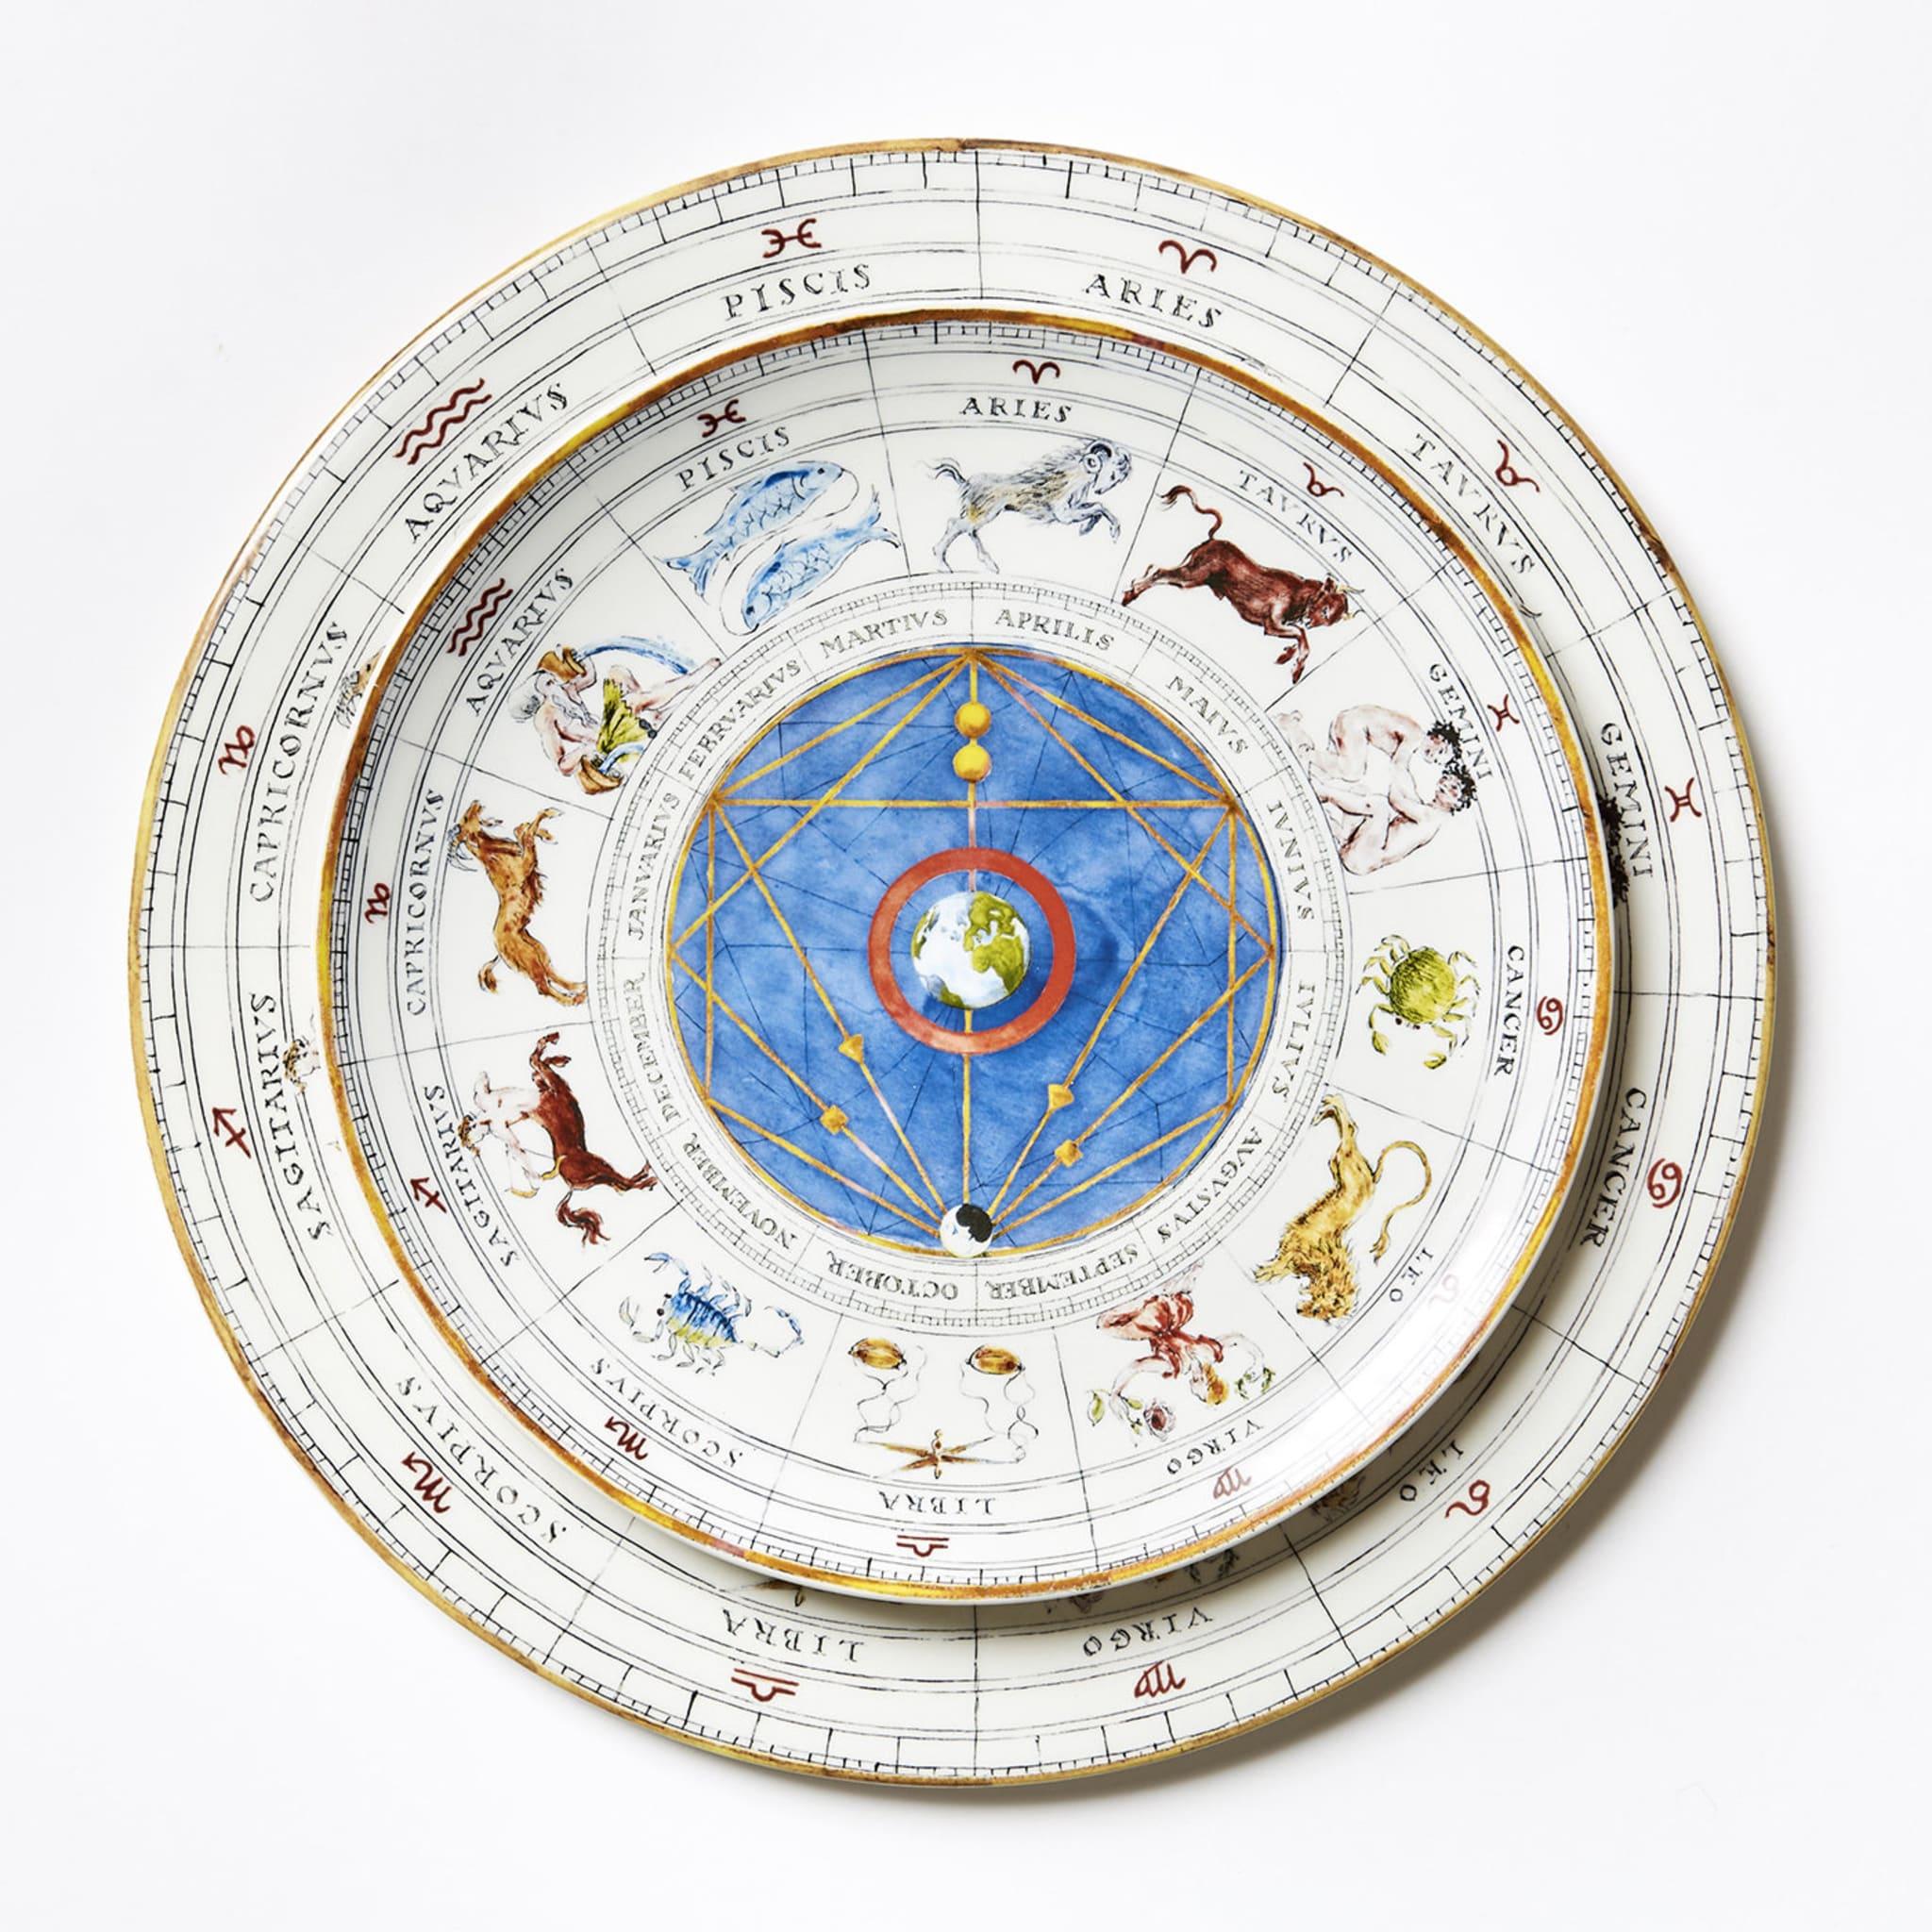 This superb charger is part of the Zodiaco collection and, either alone or combined with other pieces from the same series, will give a precious accent to any table. Its colorful decoration comprises a central round element in vivid blue, crossed